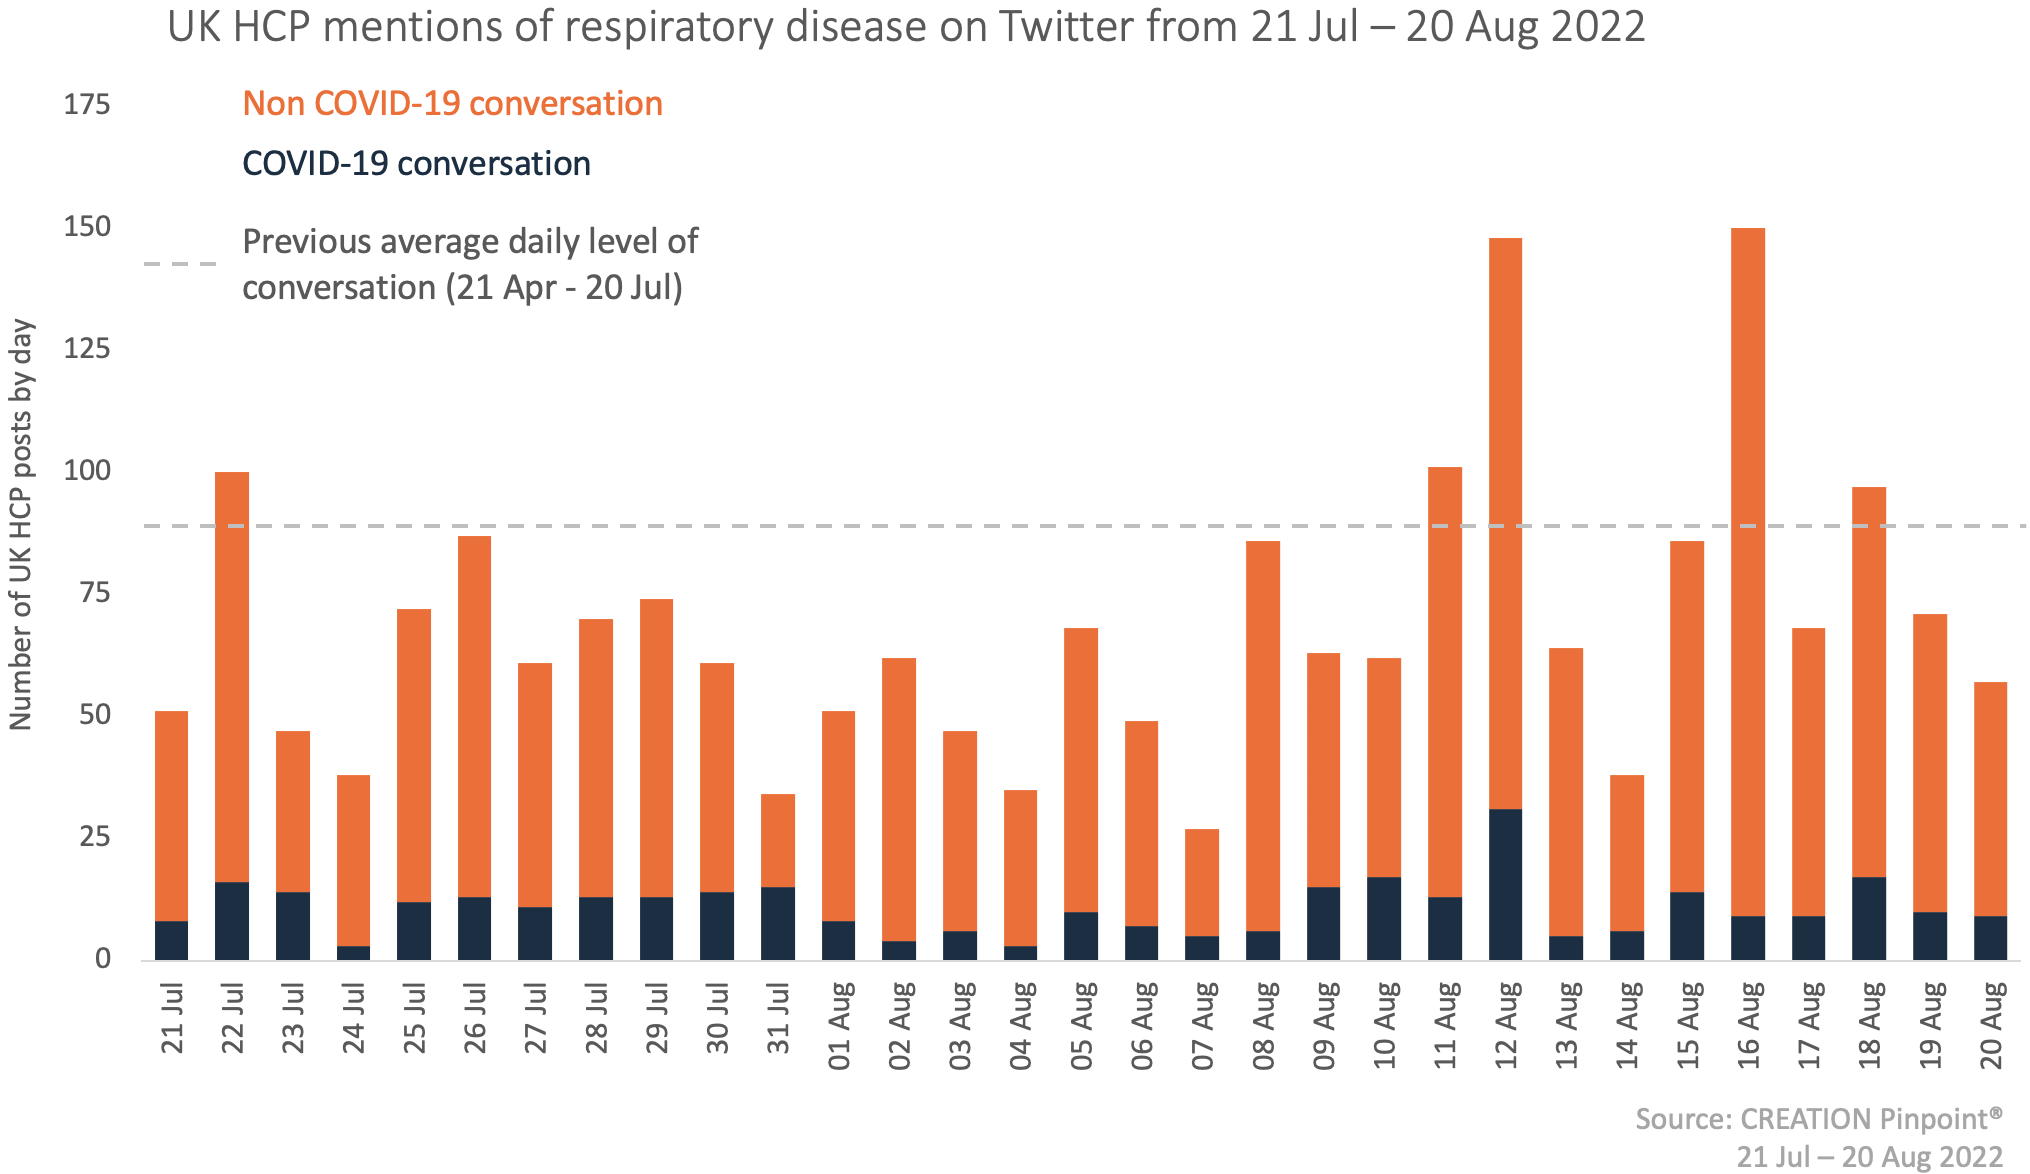 A graph showing UK HCP mentions of respiratory disease